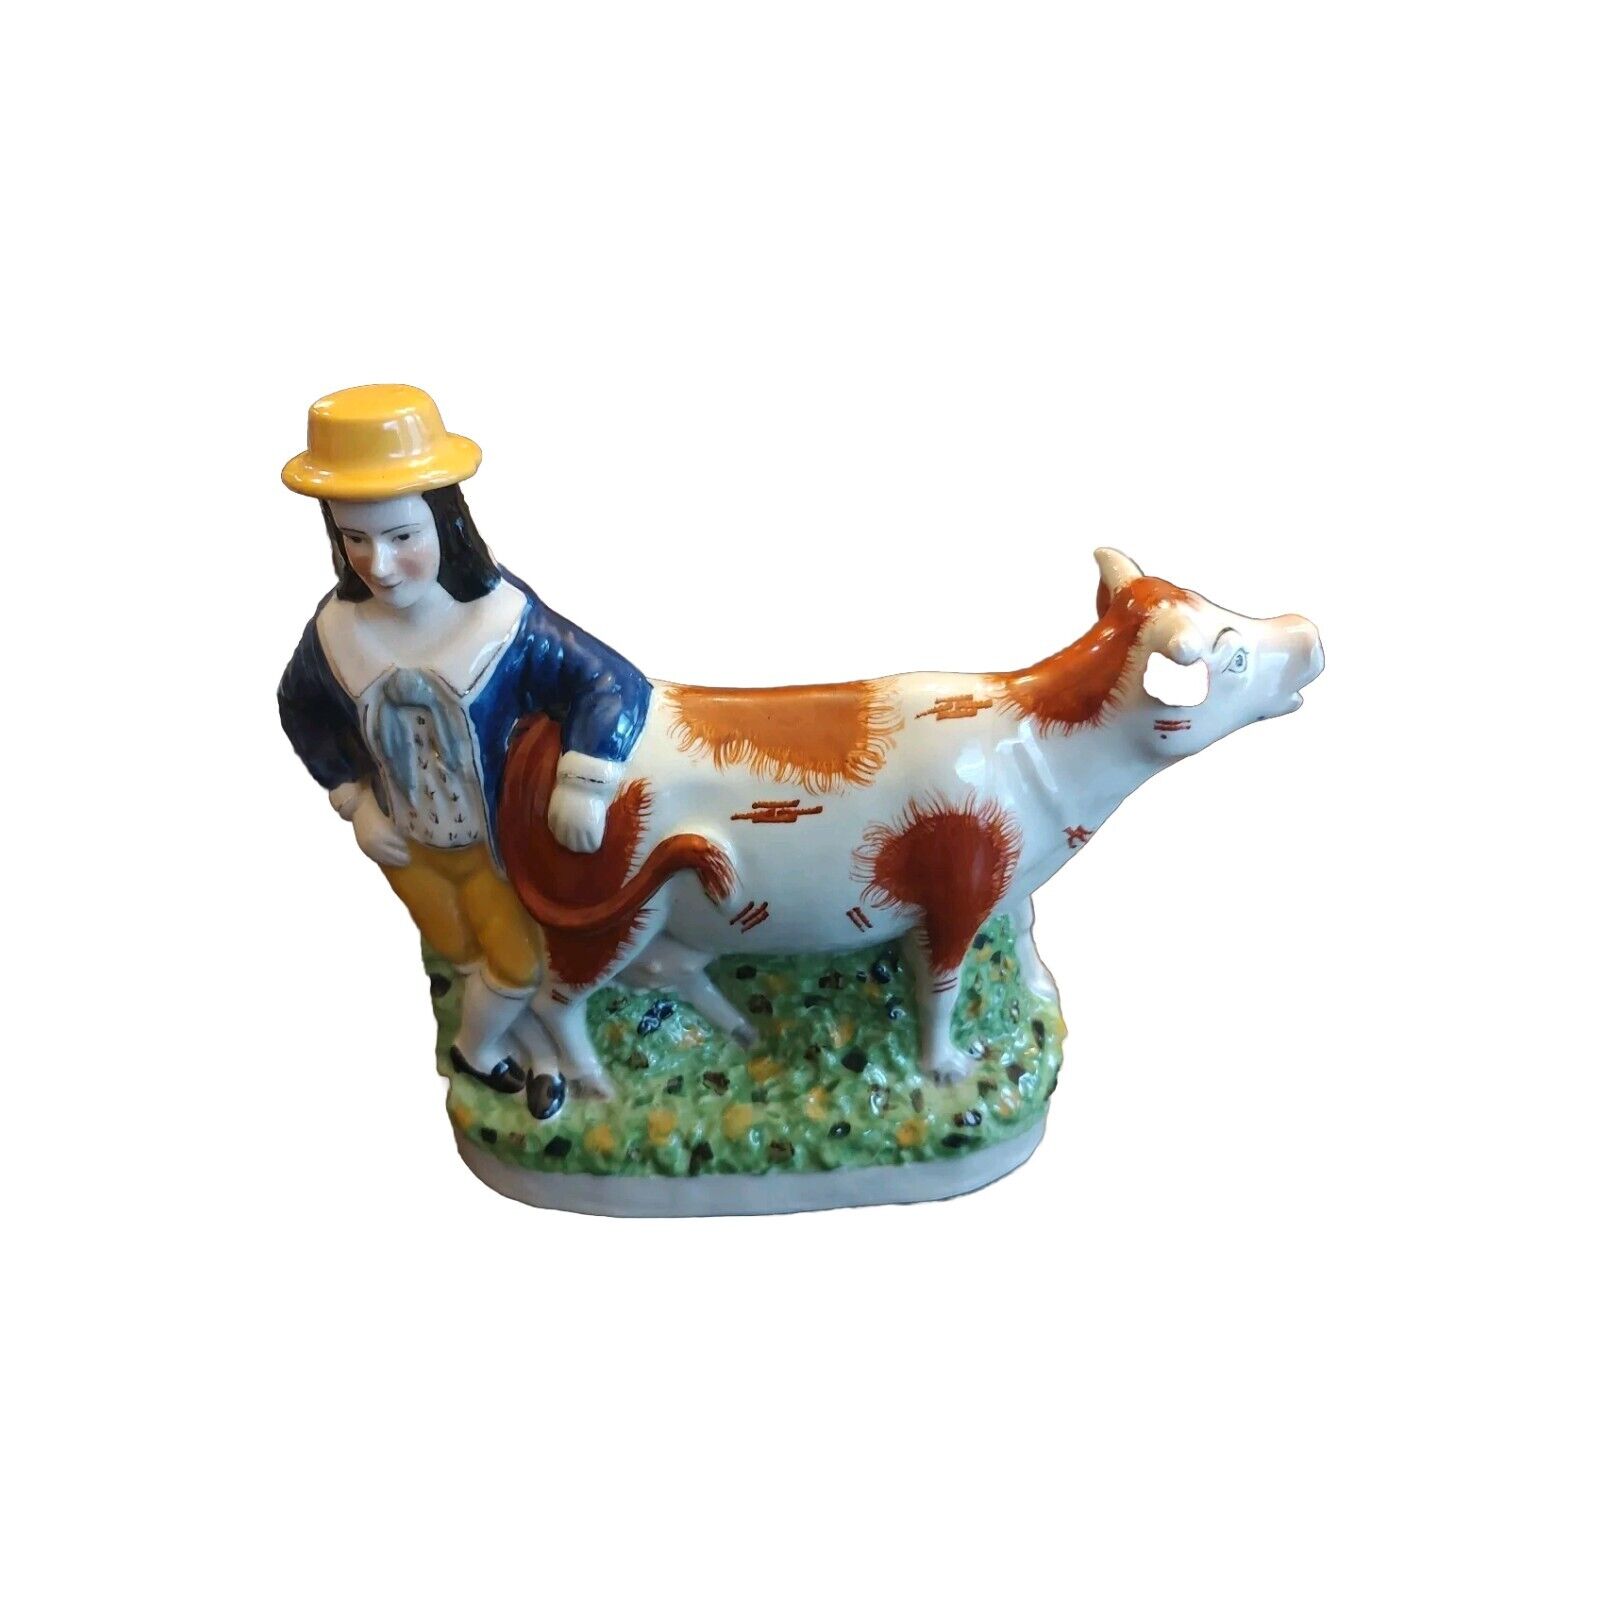 ANTIQUE STAFFORDSHIRE POTTERY FIGURE VICTORIAN STYLE BOY WITH COW EX COND.